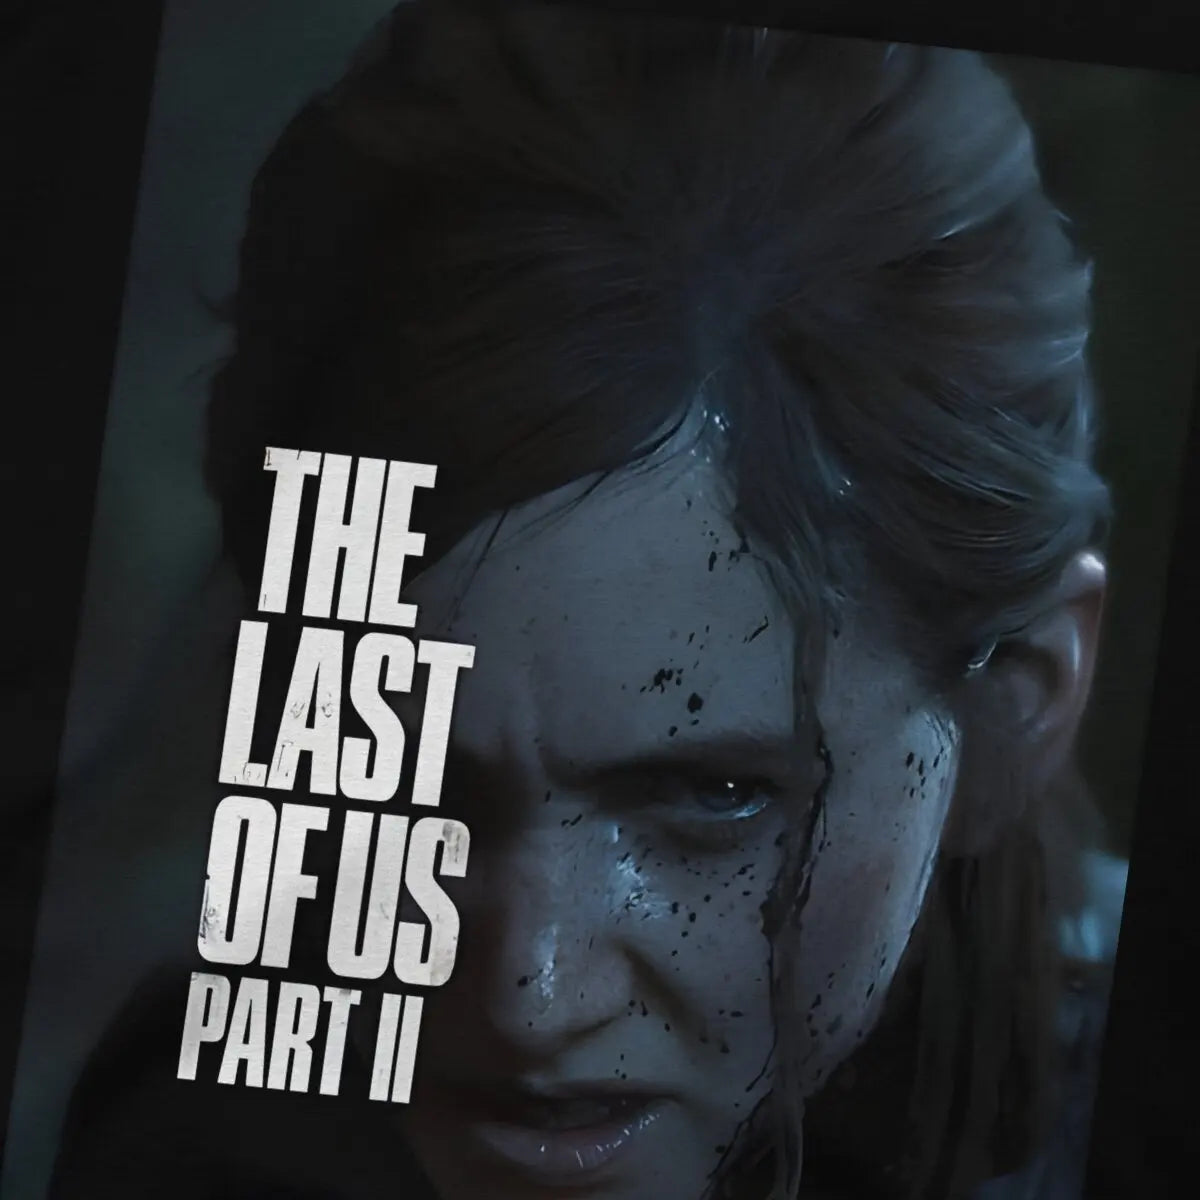 The Last of Us Part II Ellie Williams Tshirt - Available at 2Fast2See.co